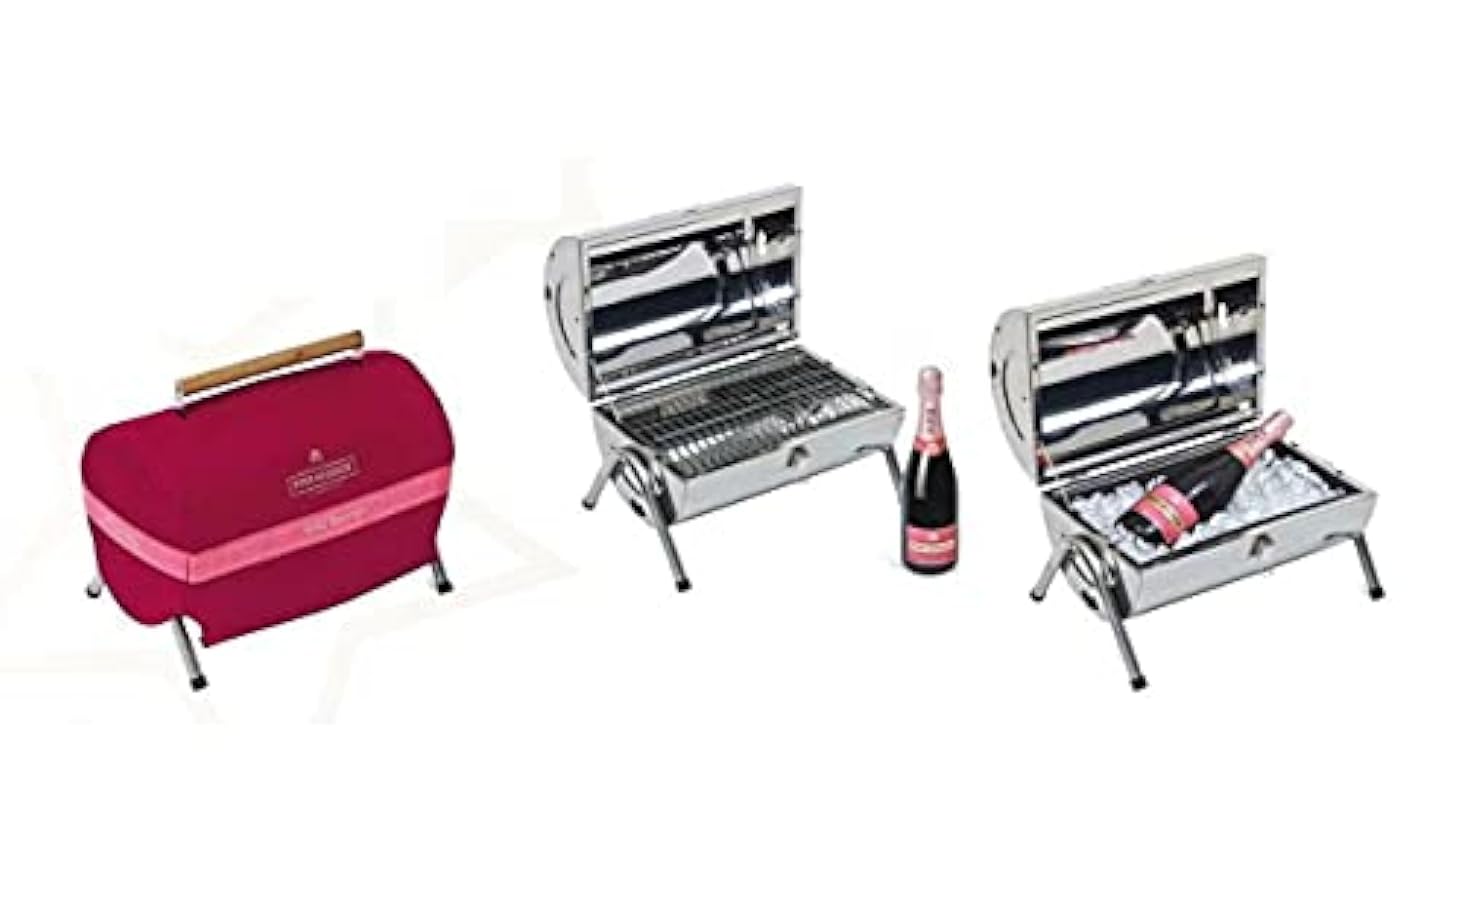 PIPER-HEIDSIECK CHAMPAGNE ROSE´ SAUVAGE 75 CL SET BARBECUE 542198830